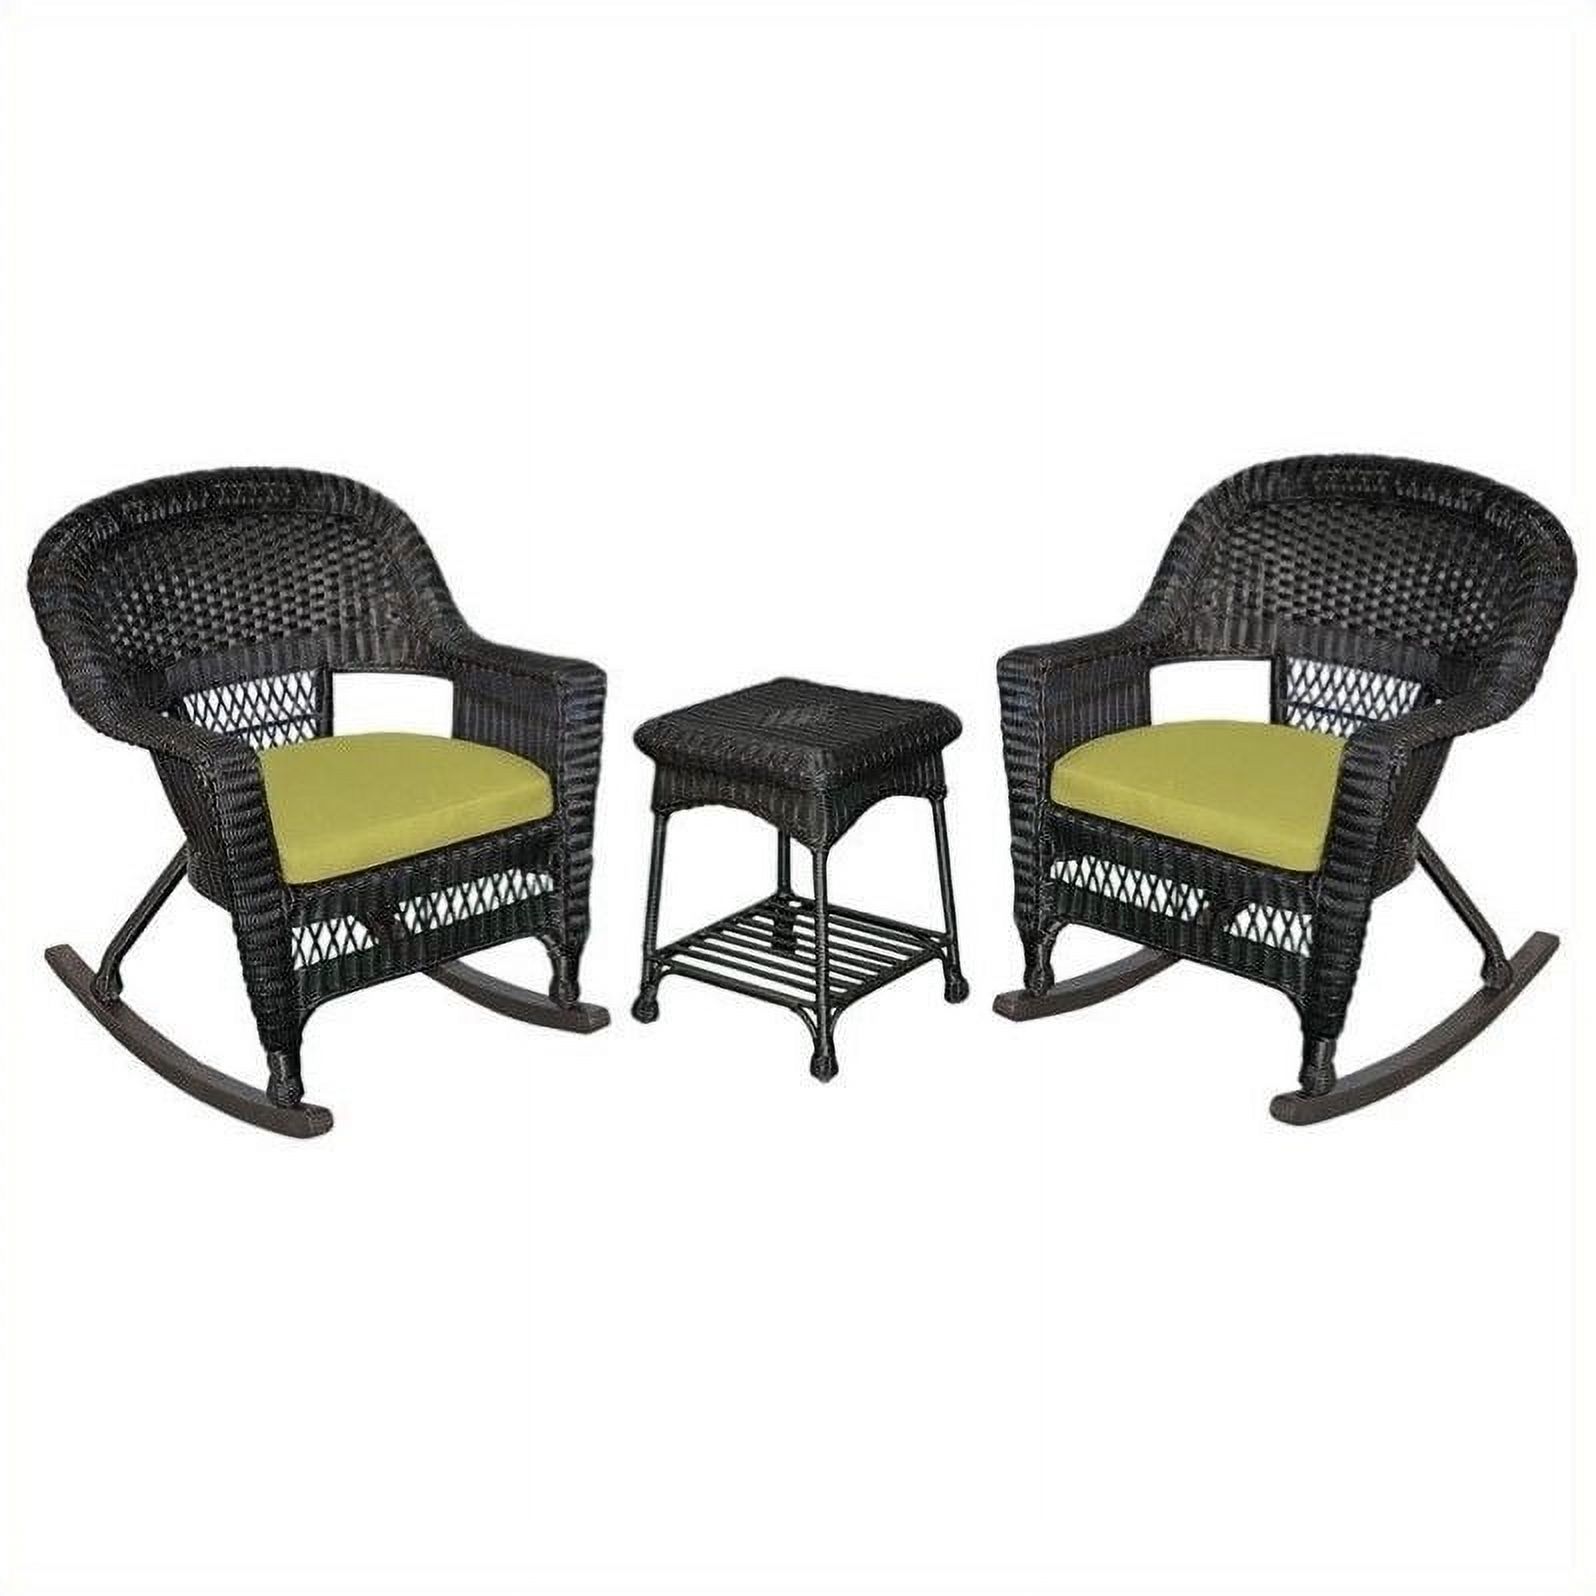 Jeco 3pc Wicker Rocker Chair Set in Black with Green Cushion - image 1 of 1